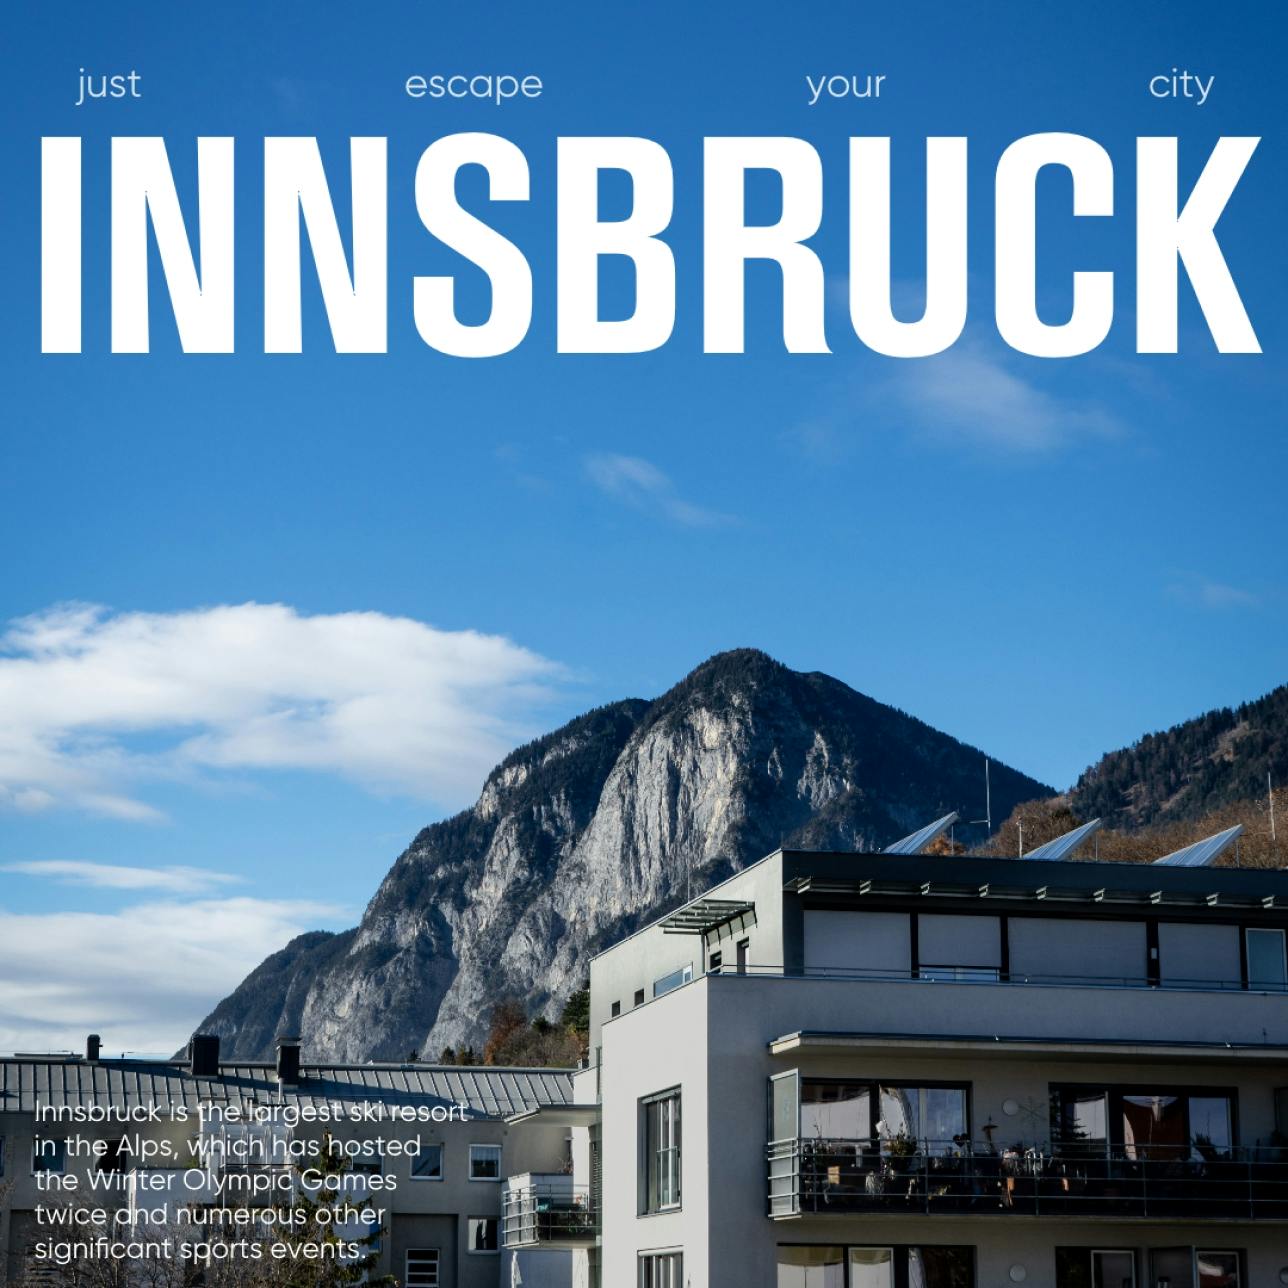 Scavenger hunt through Innsbruck old town with your phone